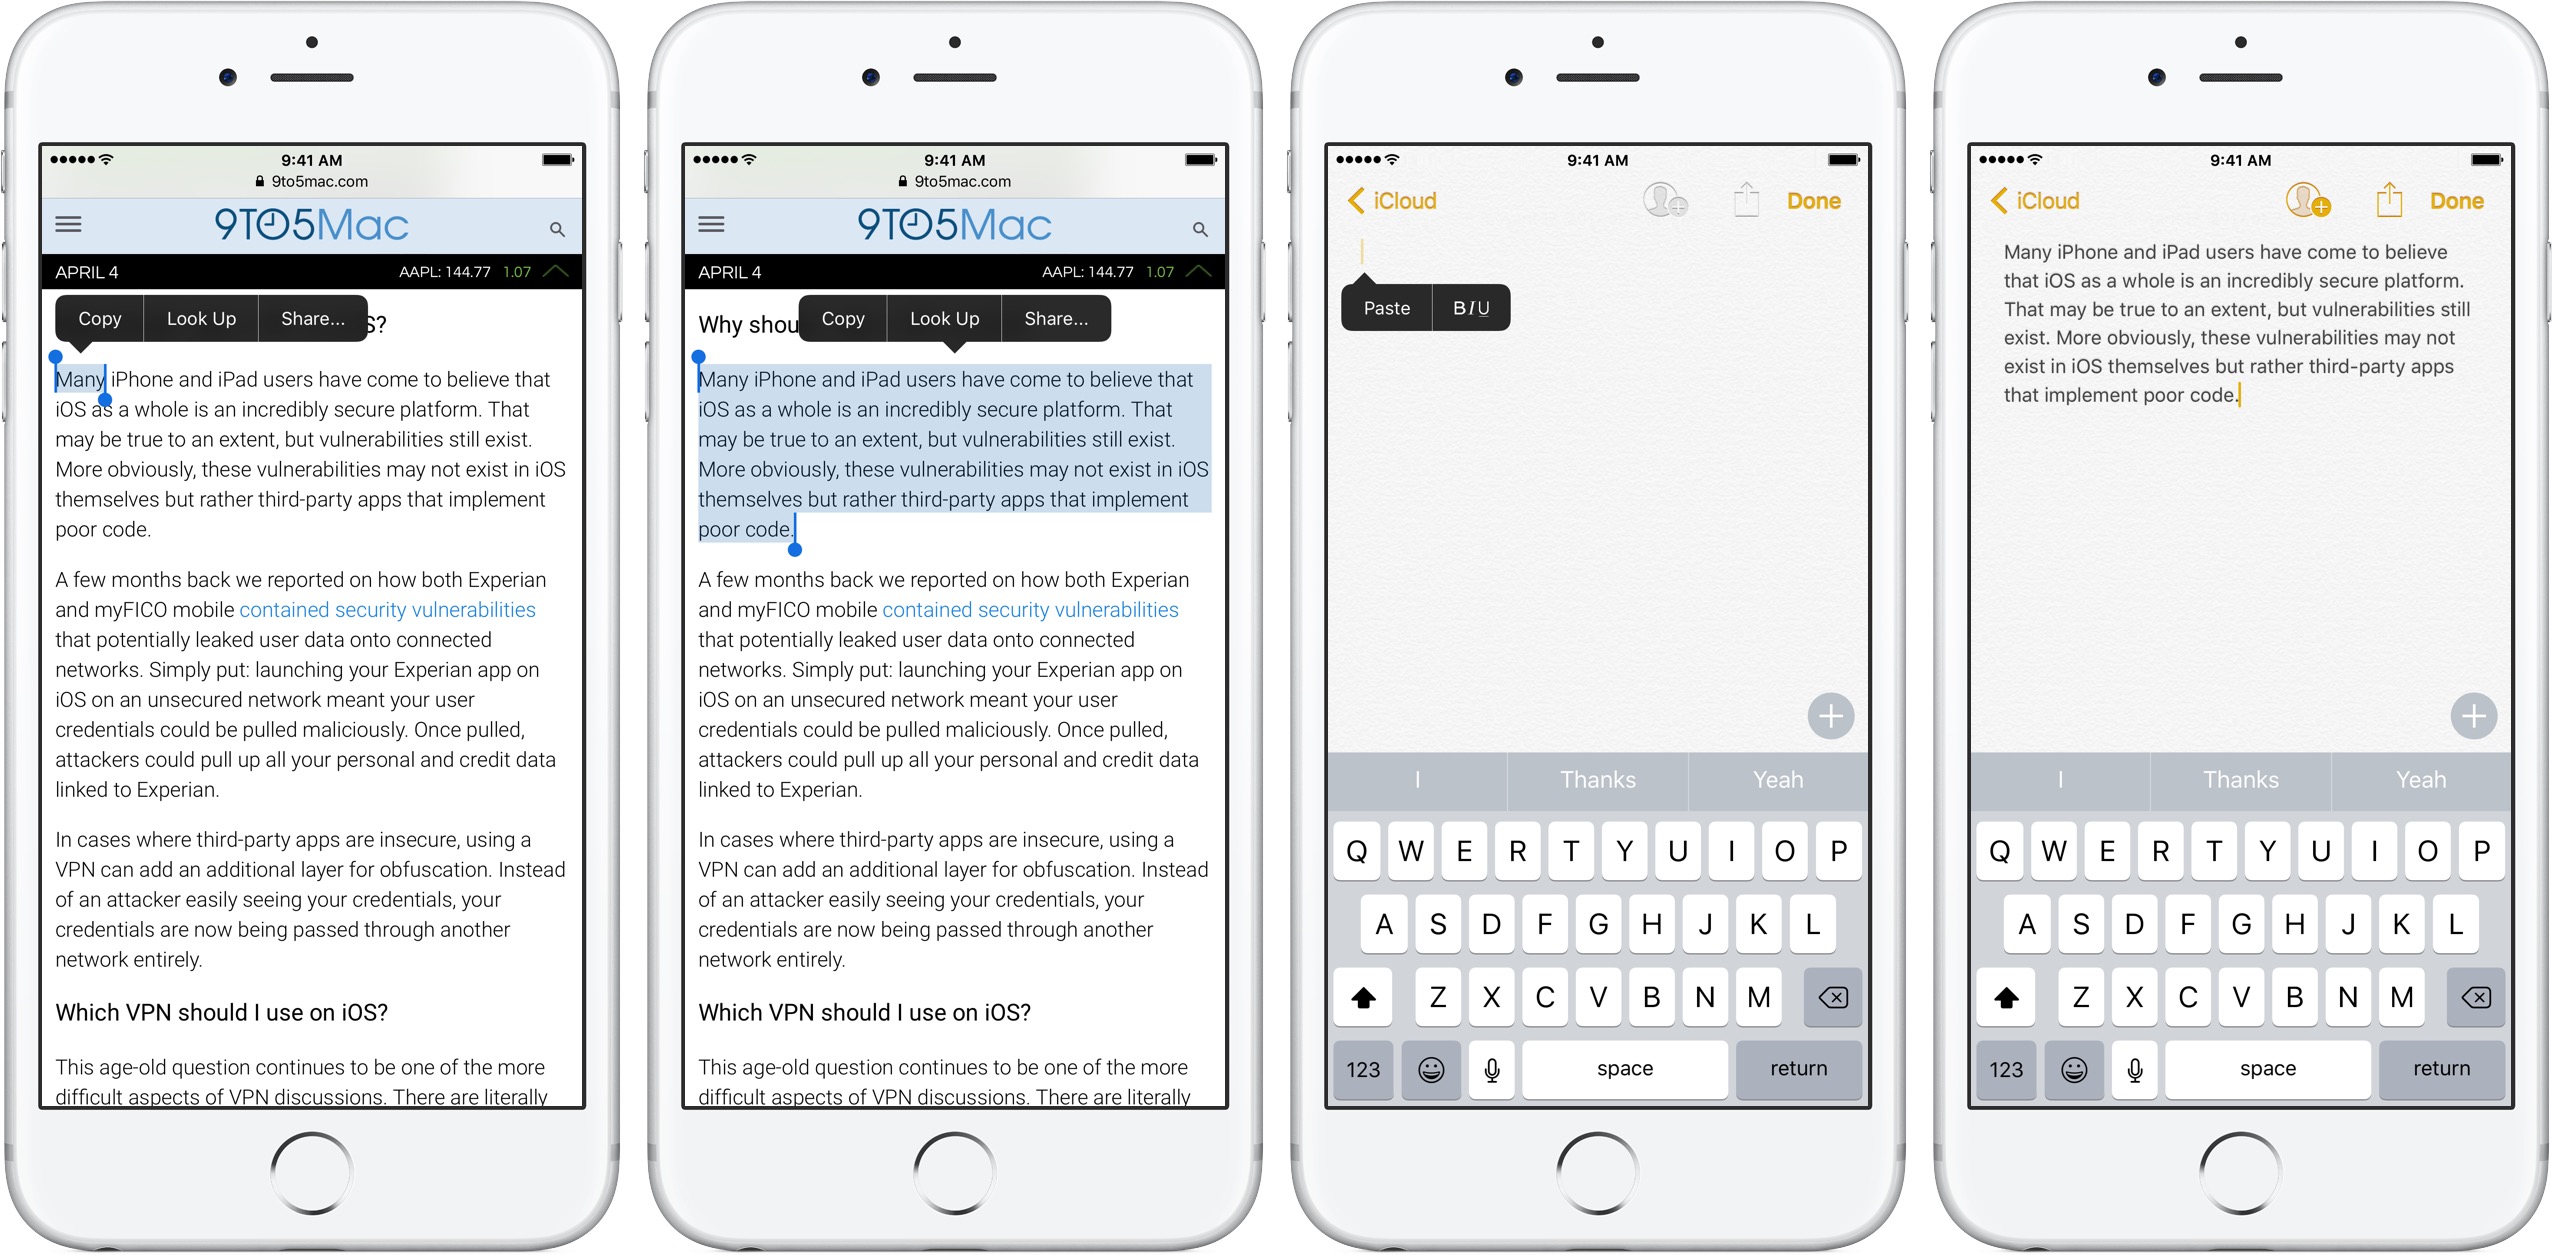 Image showing selection of text on iPhone and copying and pasting text into a new note